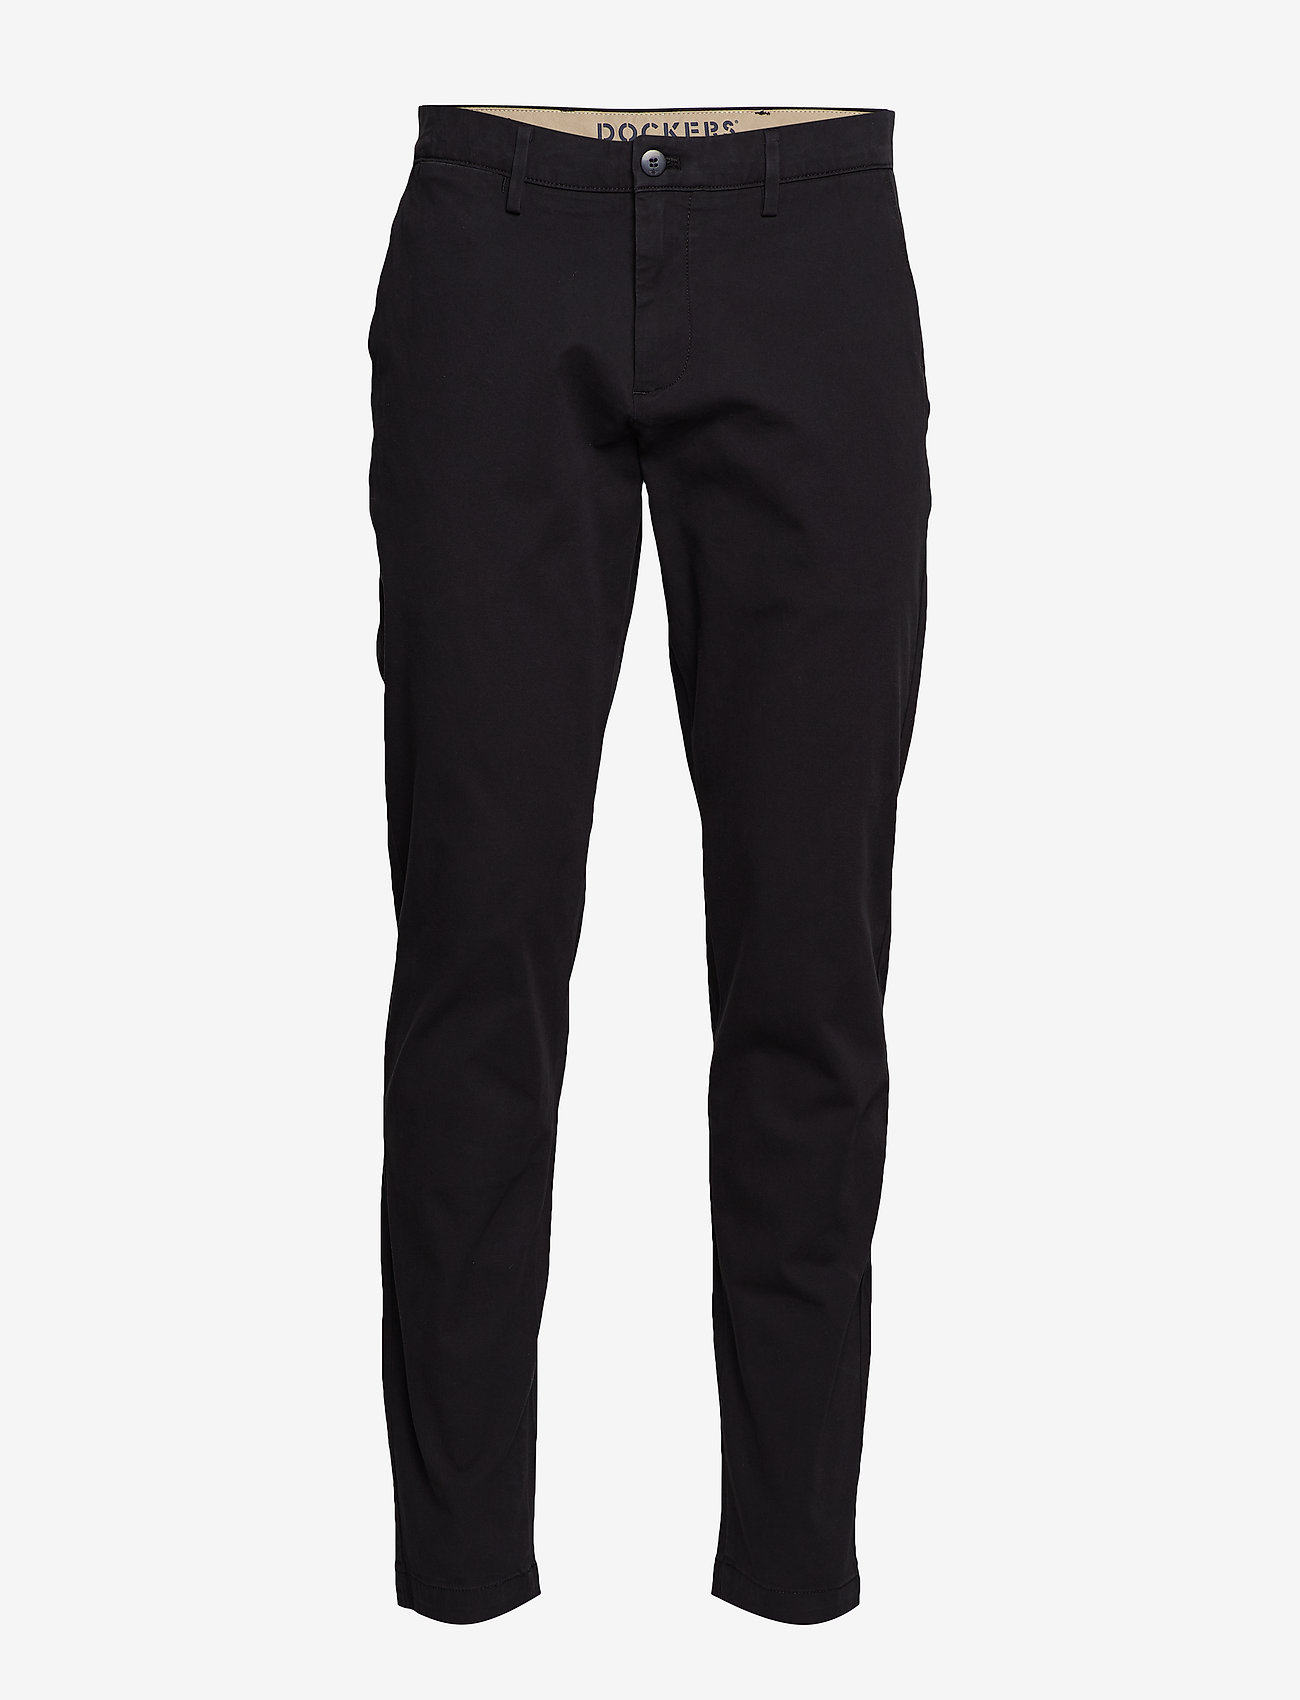 Dockers - MOTION CHINO TAPER - suit trousers - blacks - 0